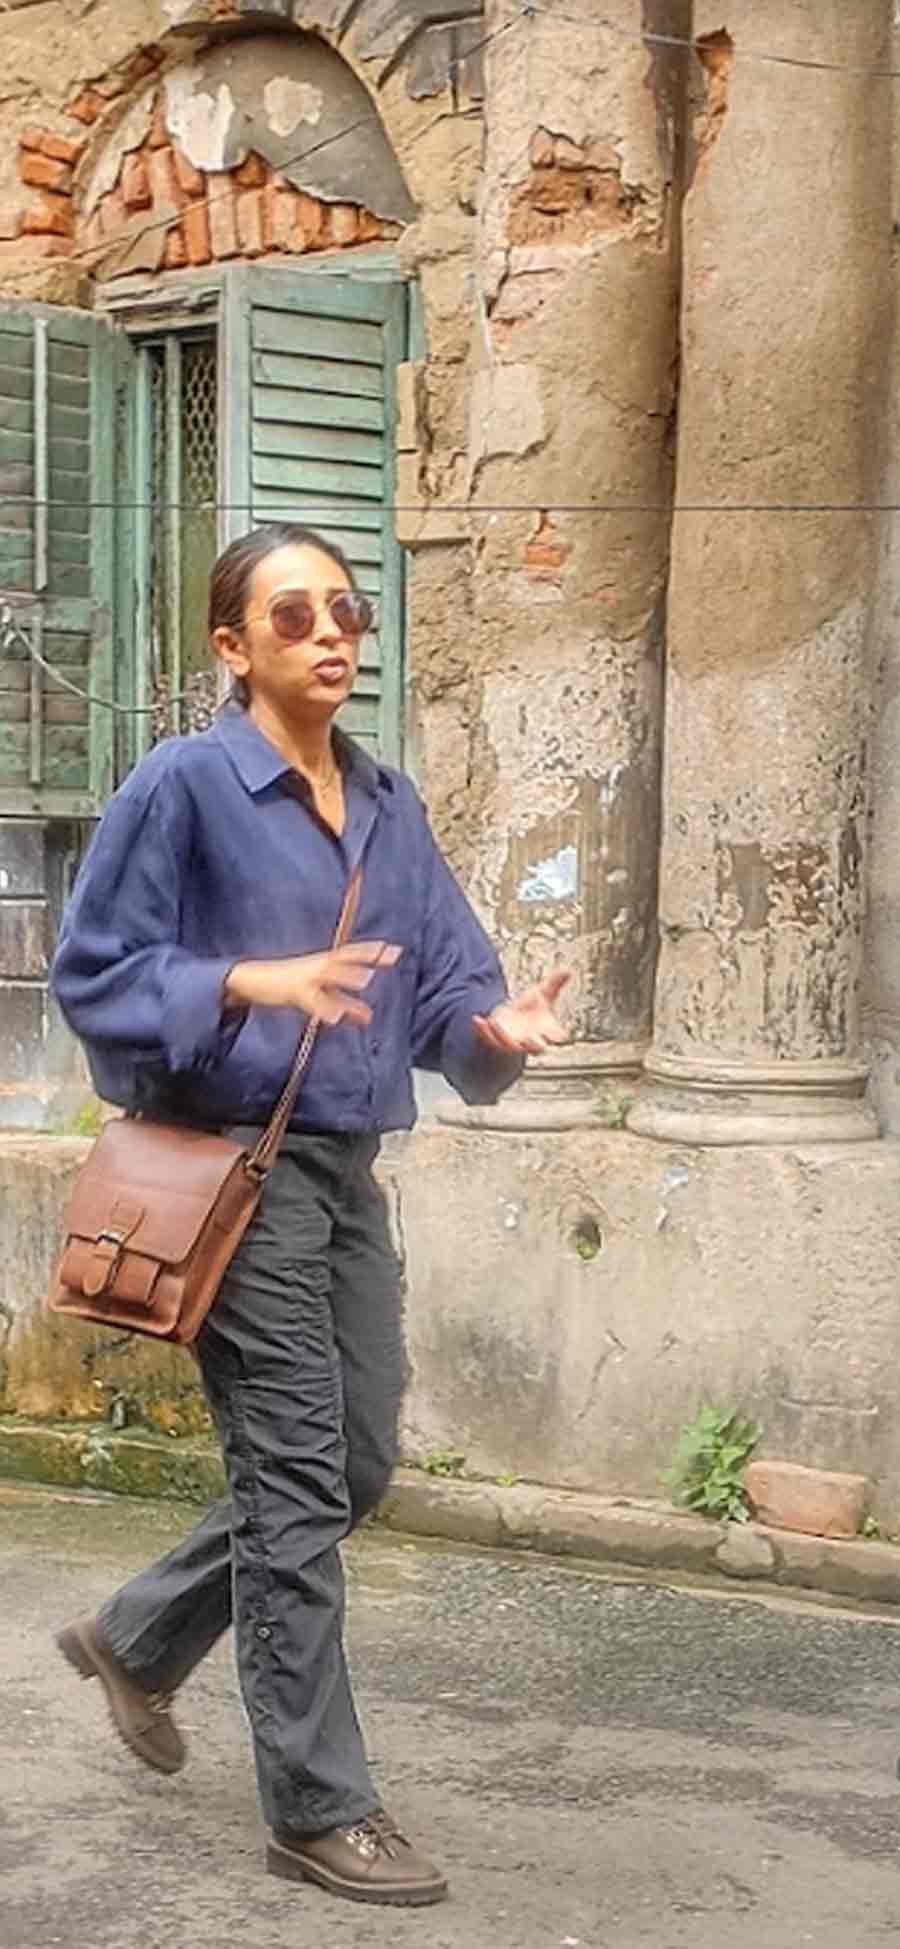 Barely a stone’s throw away from the idol-making hub of the city, Karisma Kapoor and her crew shot for ‘Brown’, an upcoming suspense thriller web series by Zee Studios